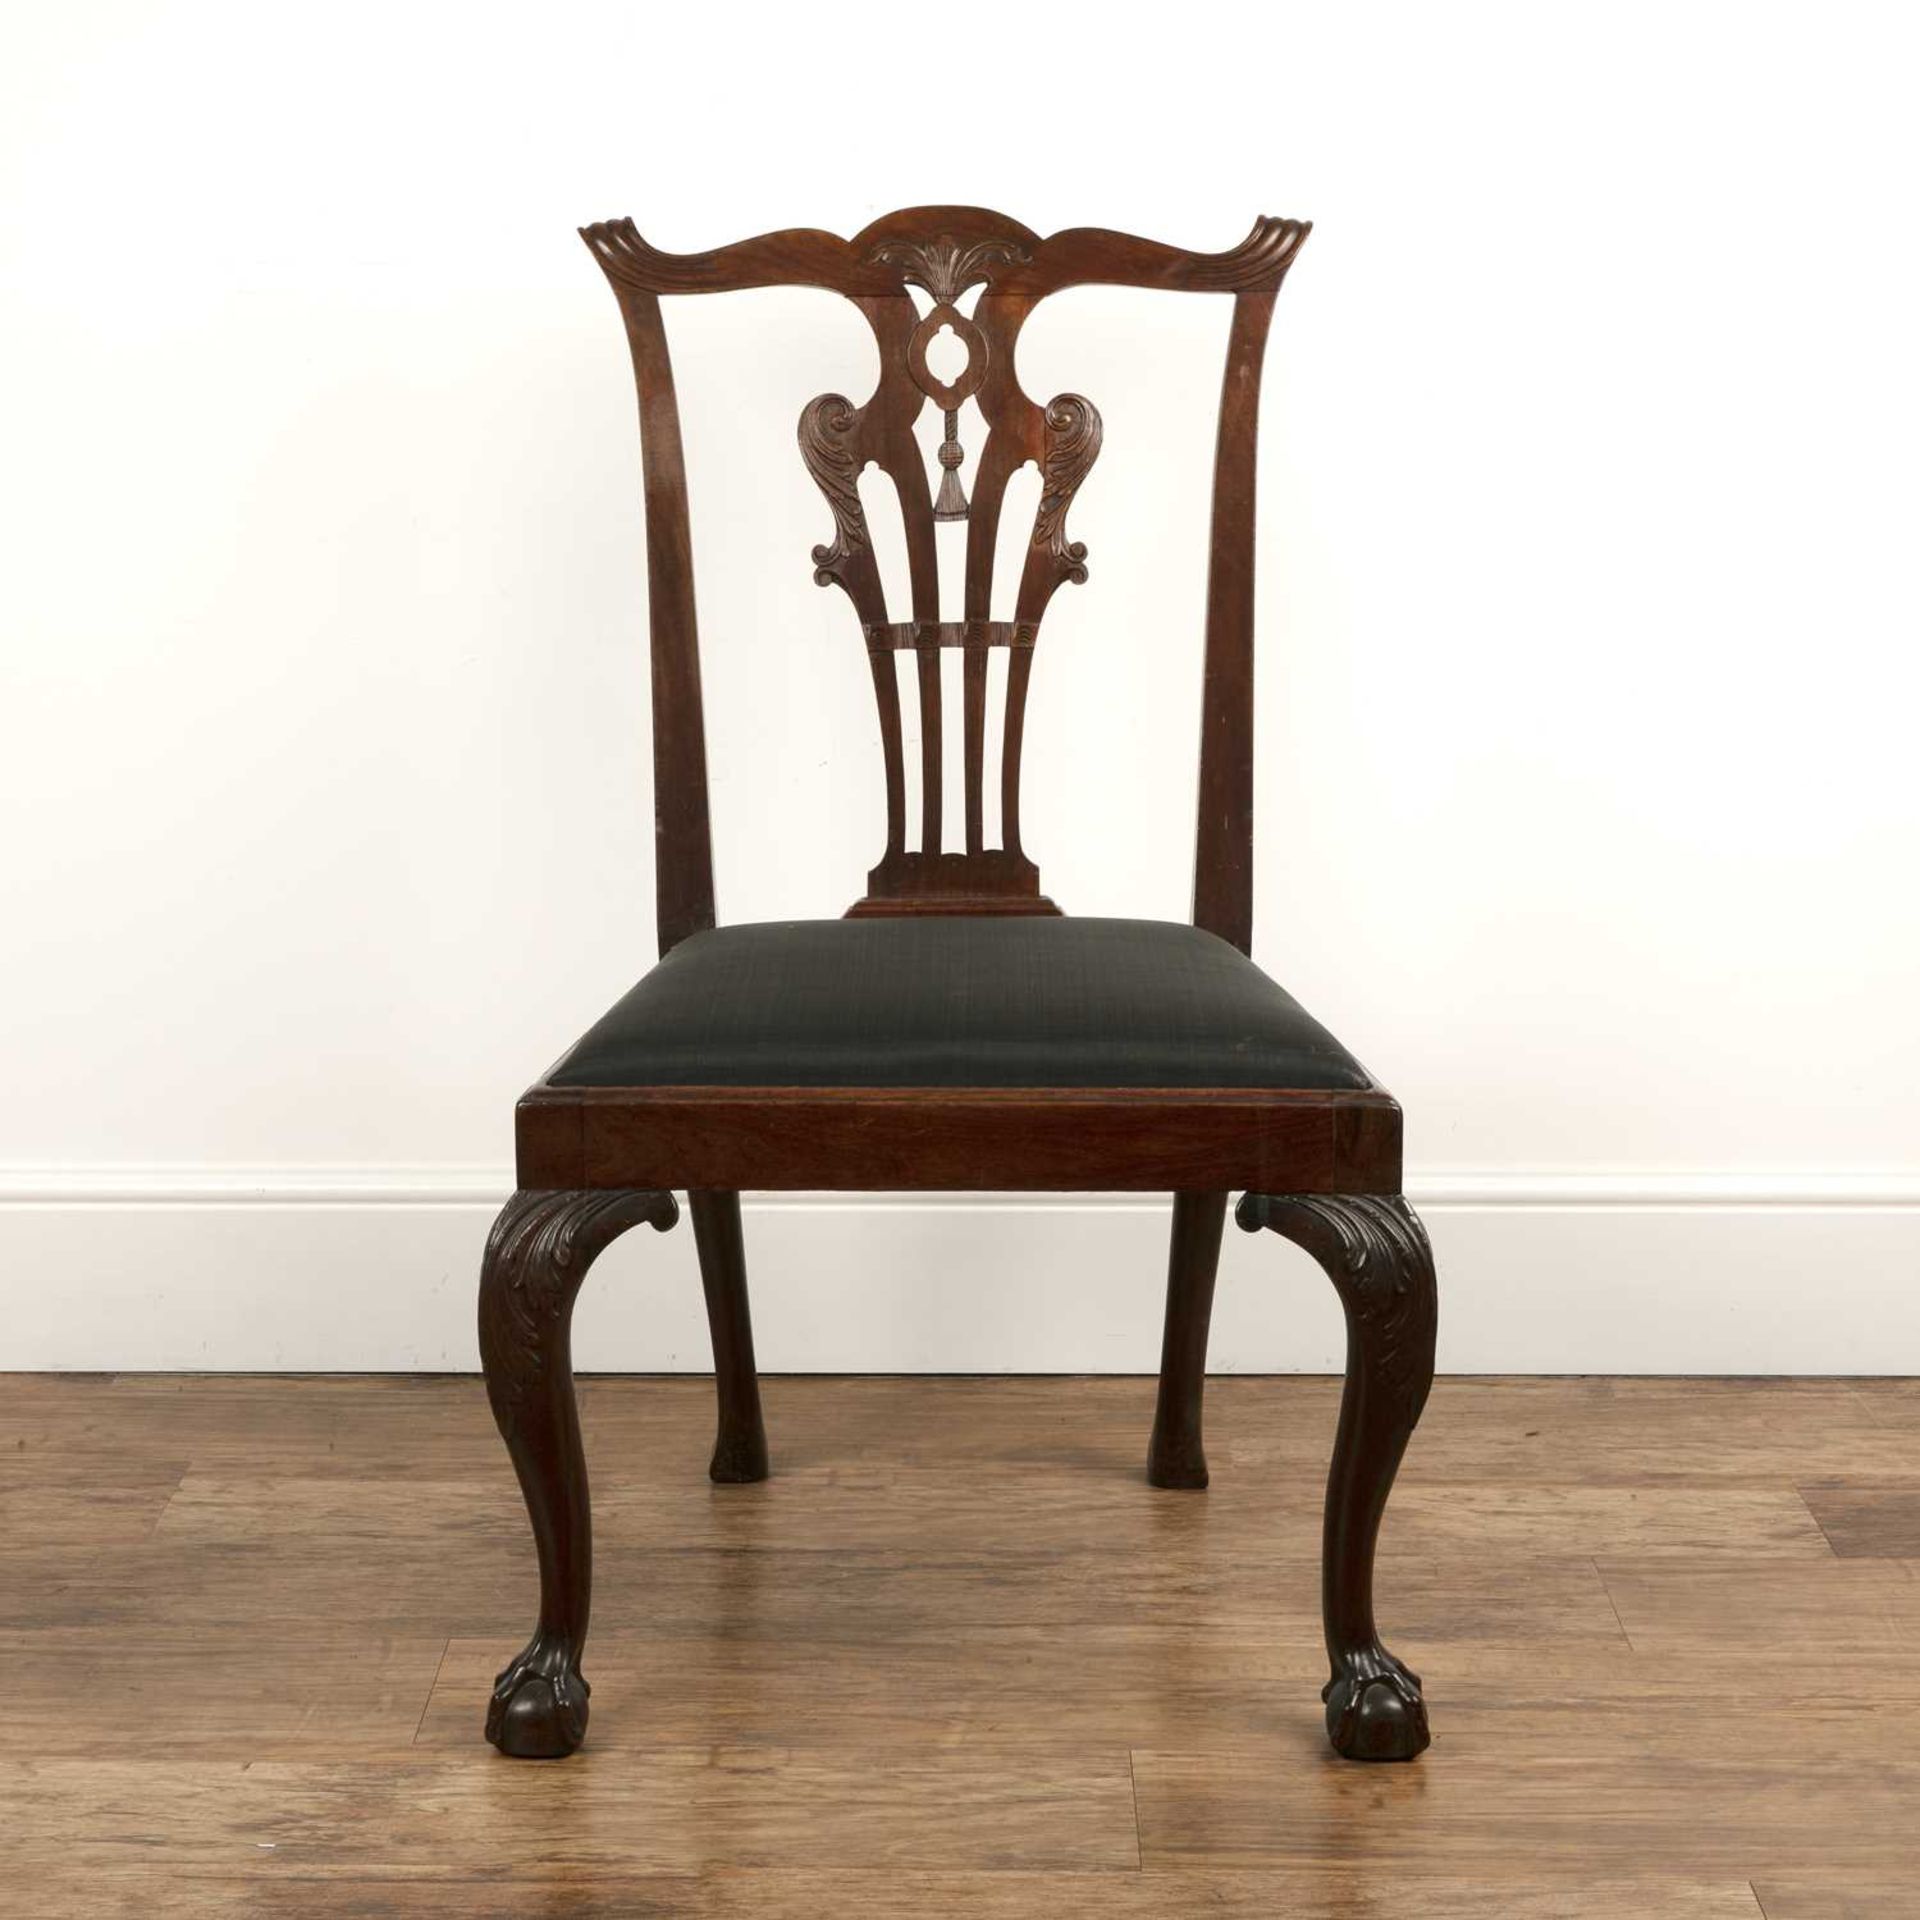 Single mahogany side chair with a carved splat back, 58cm wide x 96cm high Provenance: The